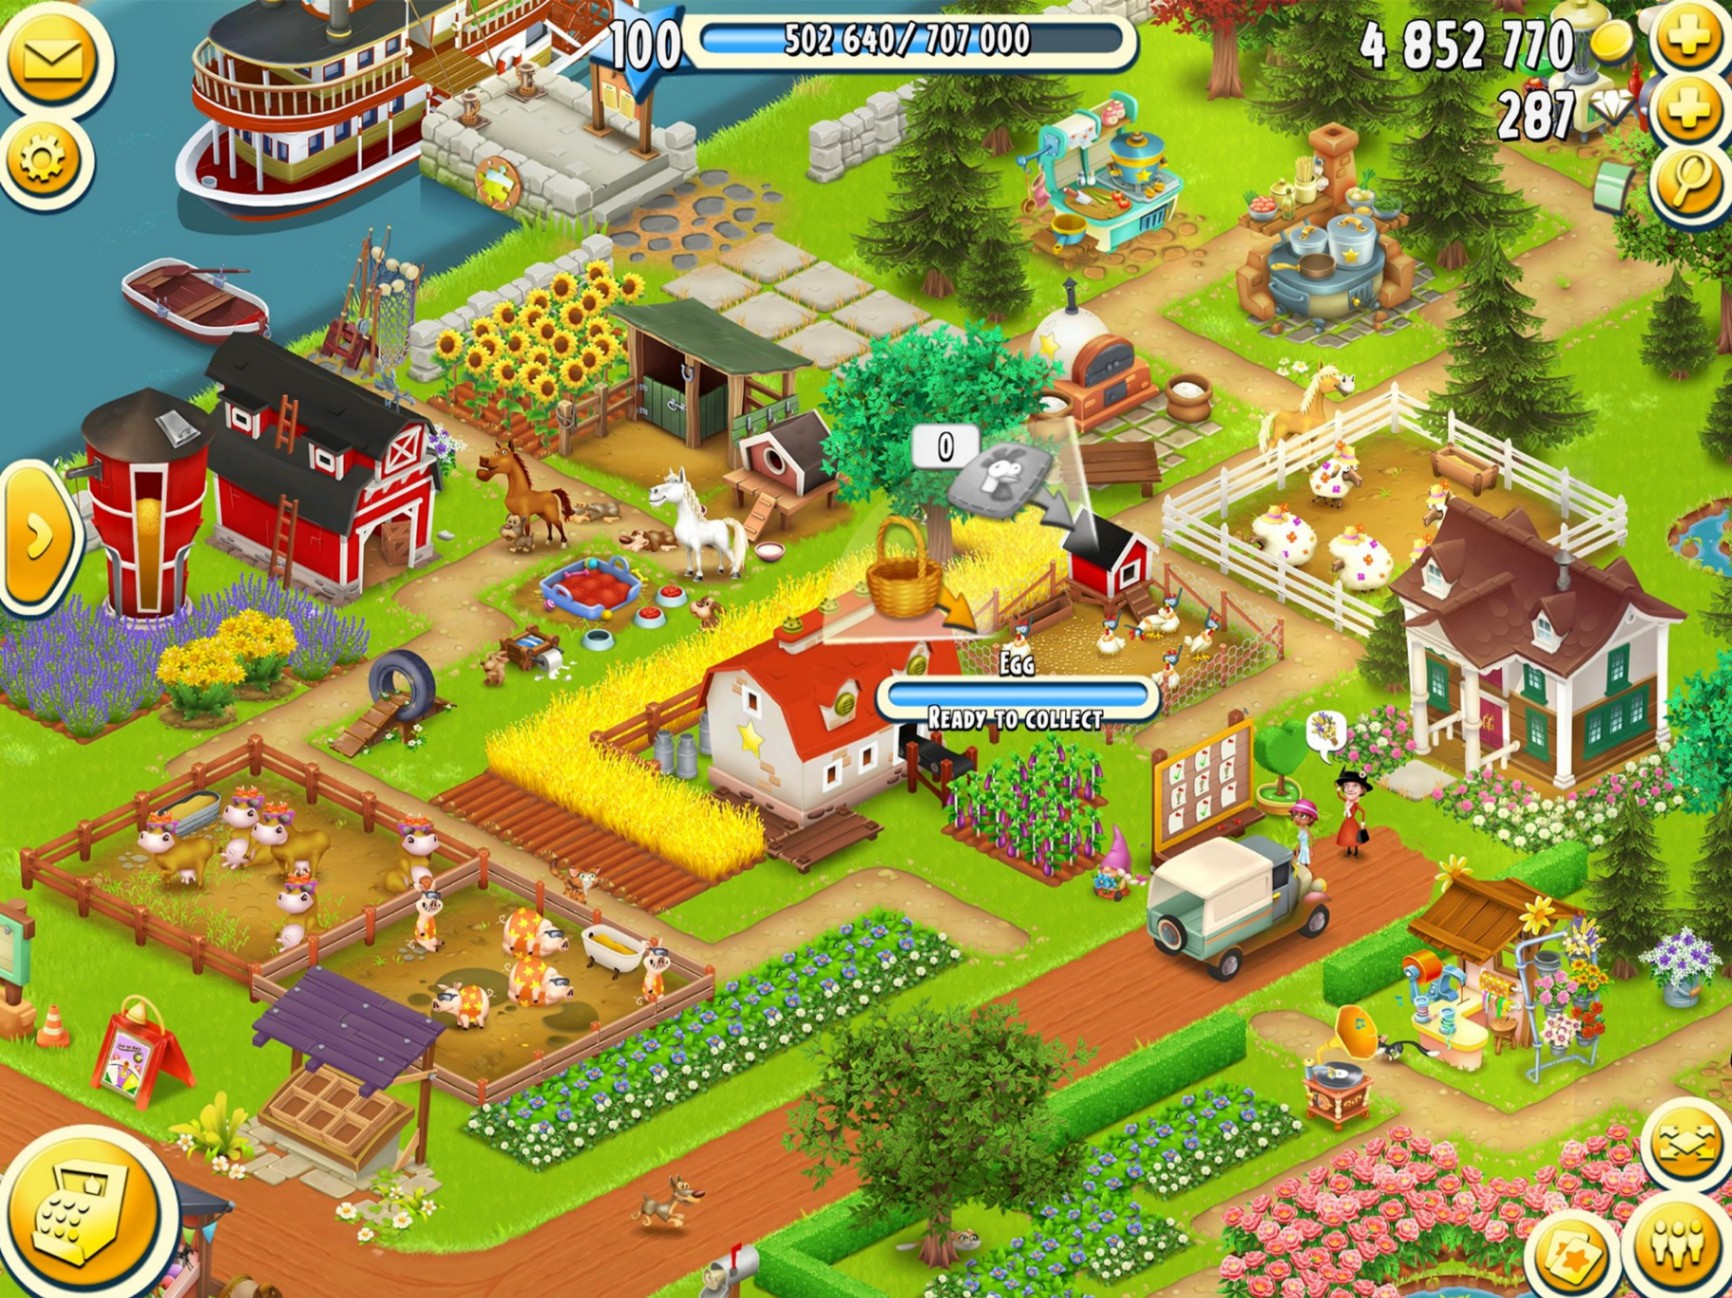 Hay Day - See How to Get Diamonds